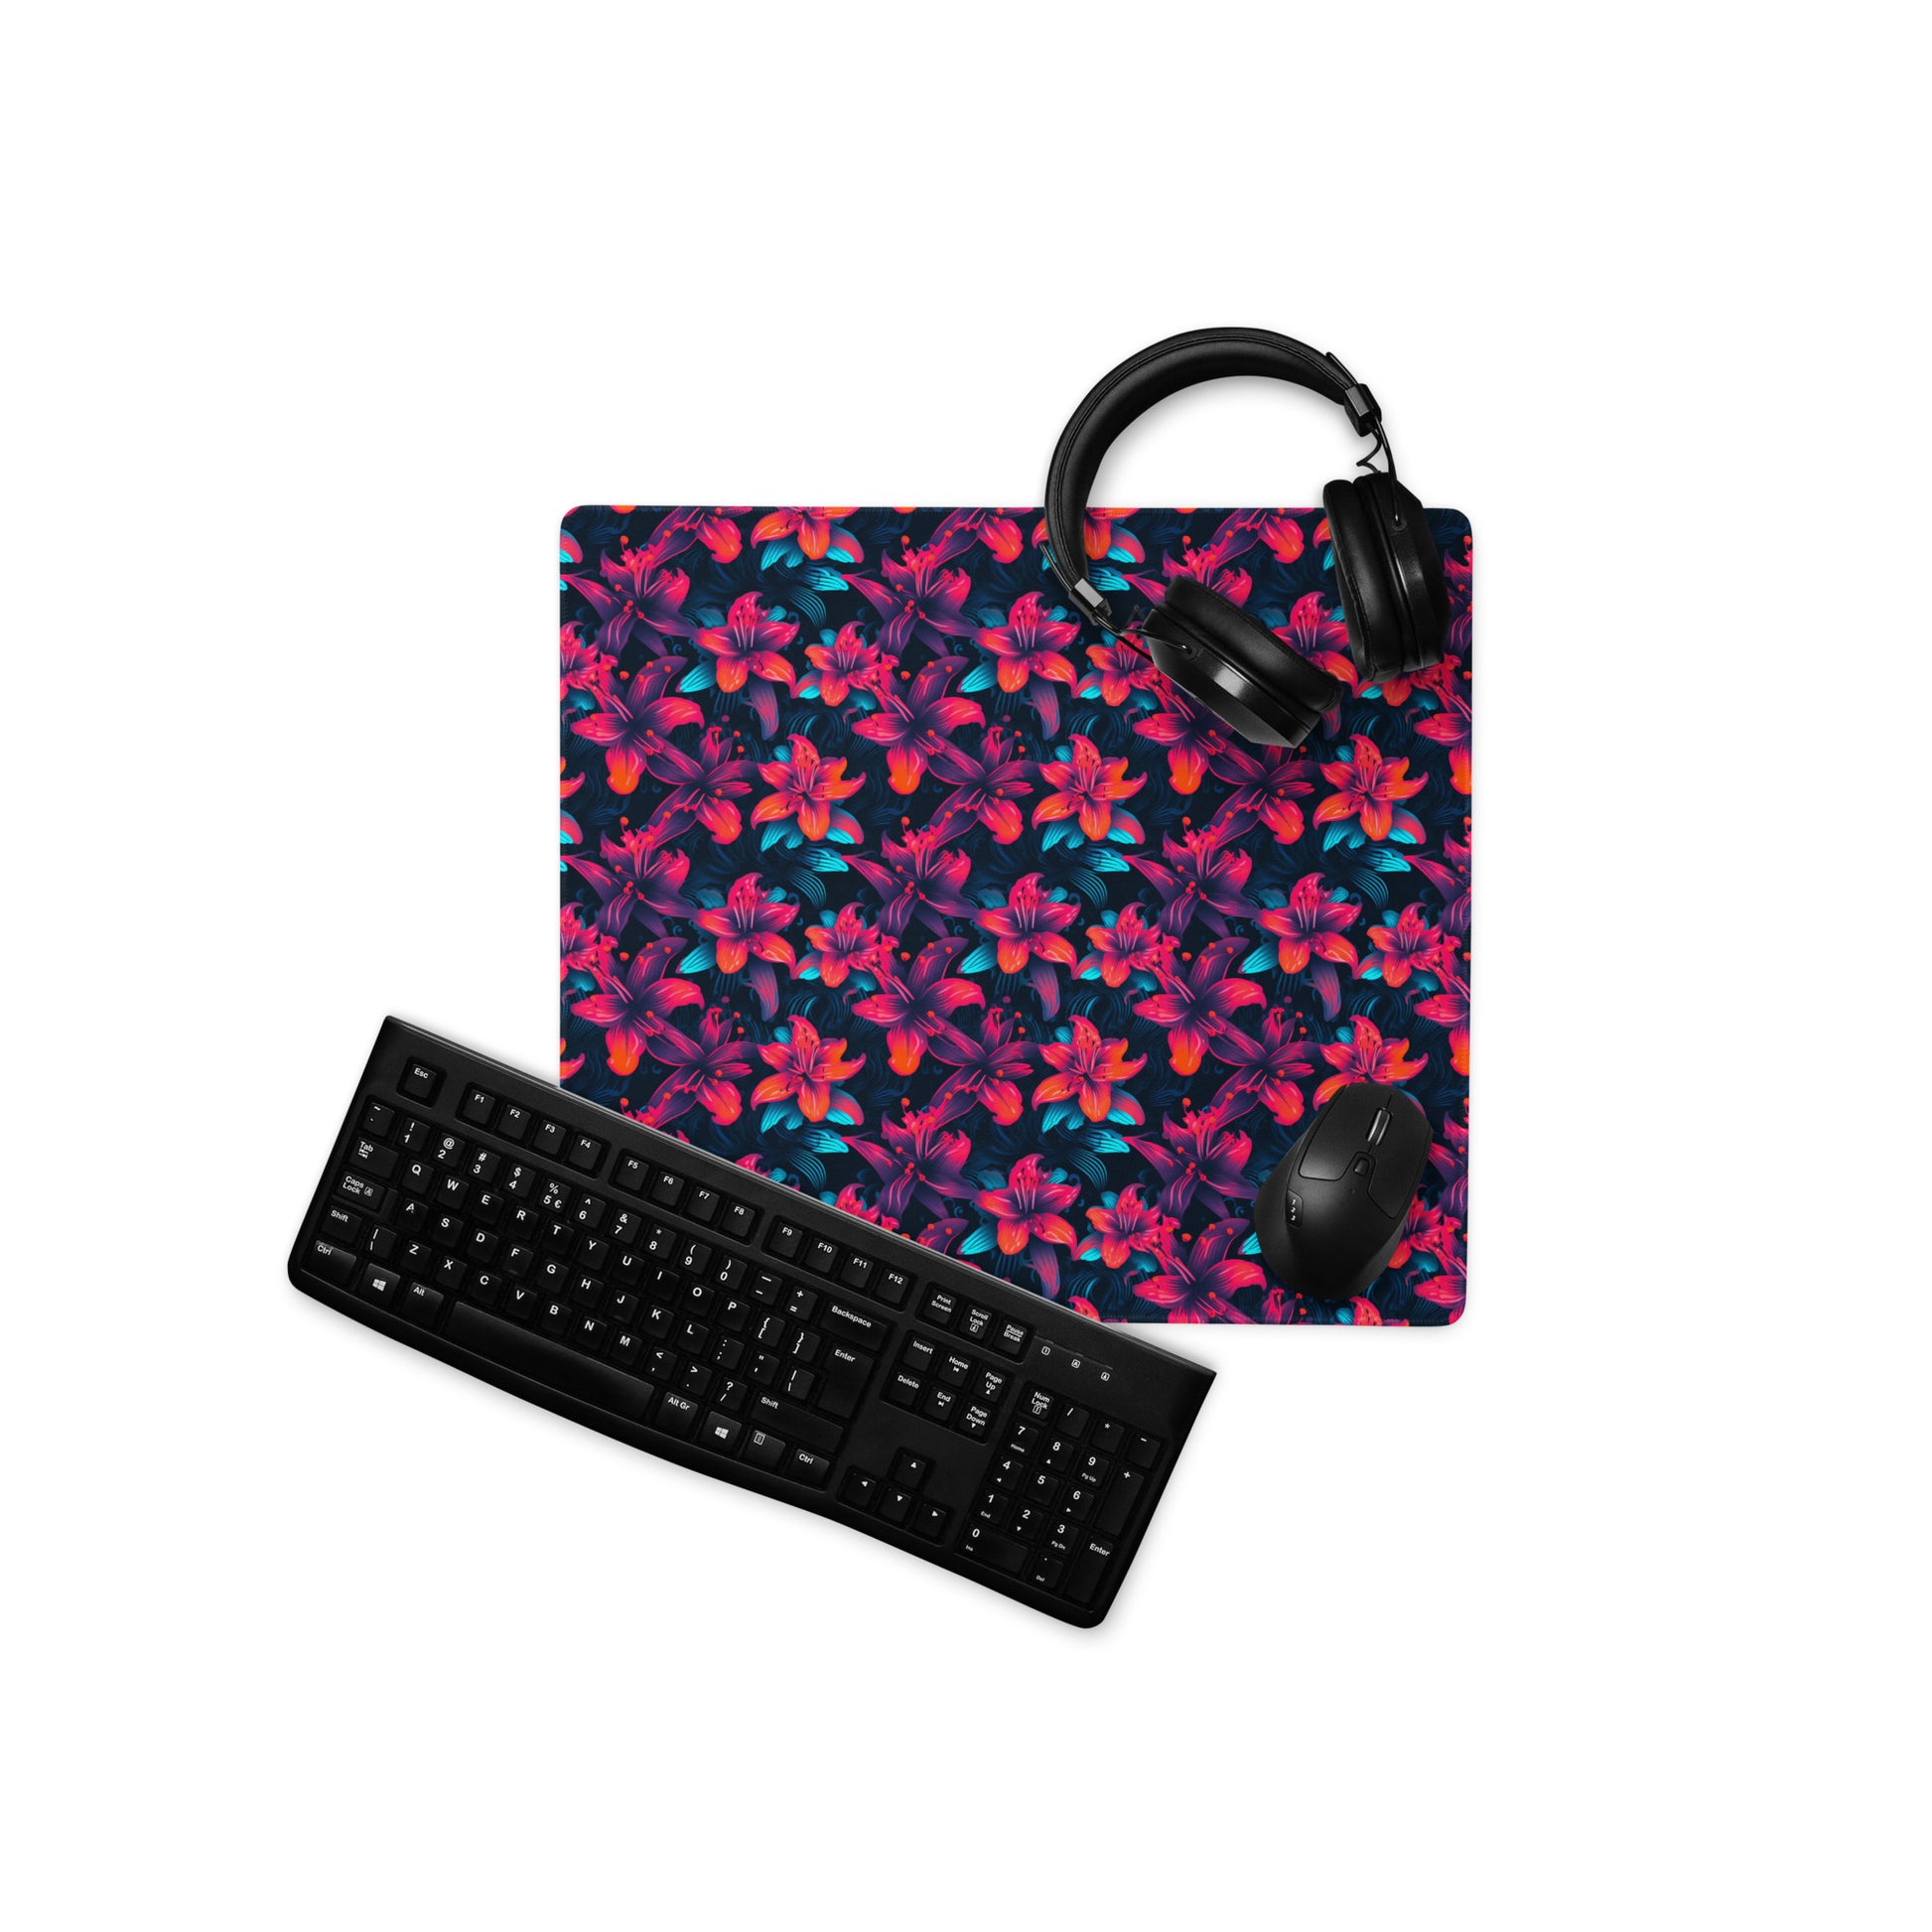 A 18" x 16" desk pad with a neon red and blue floral pattern. With a keyboard, mouse, and headphones sitting on it.